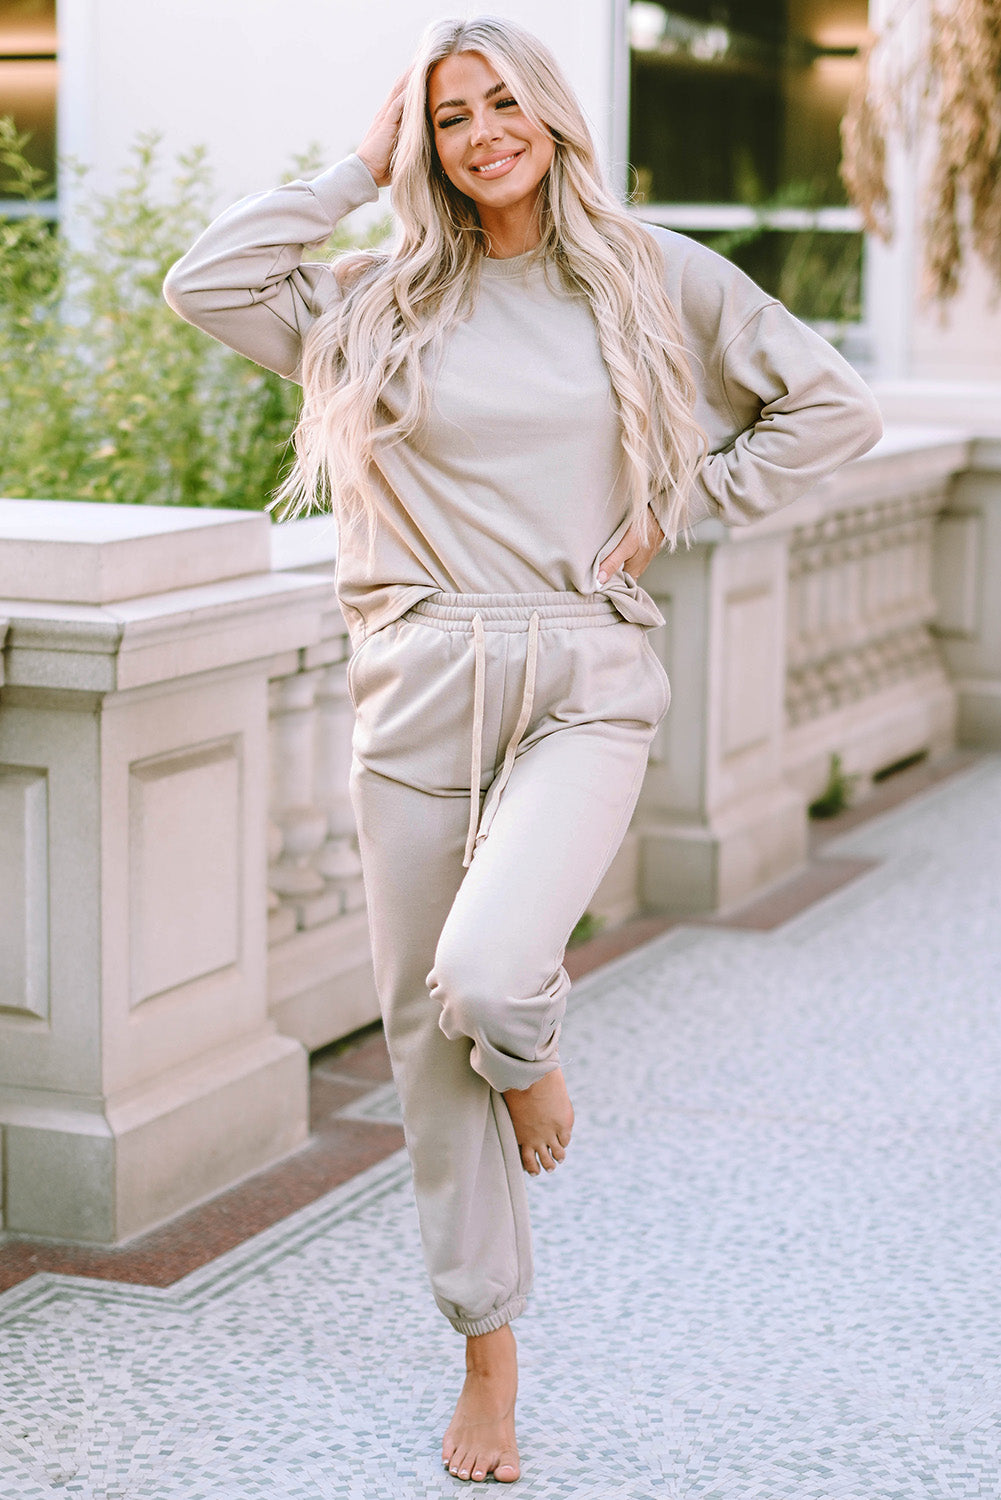 Gray Long Sleeve Top and Drawstring Pants Lounge Outfit